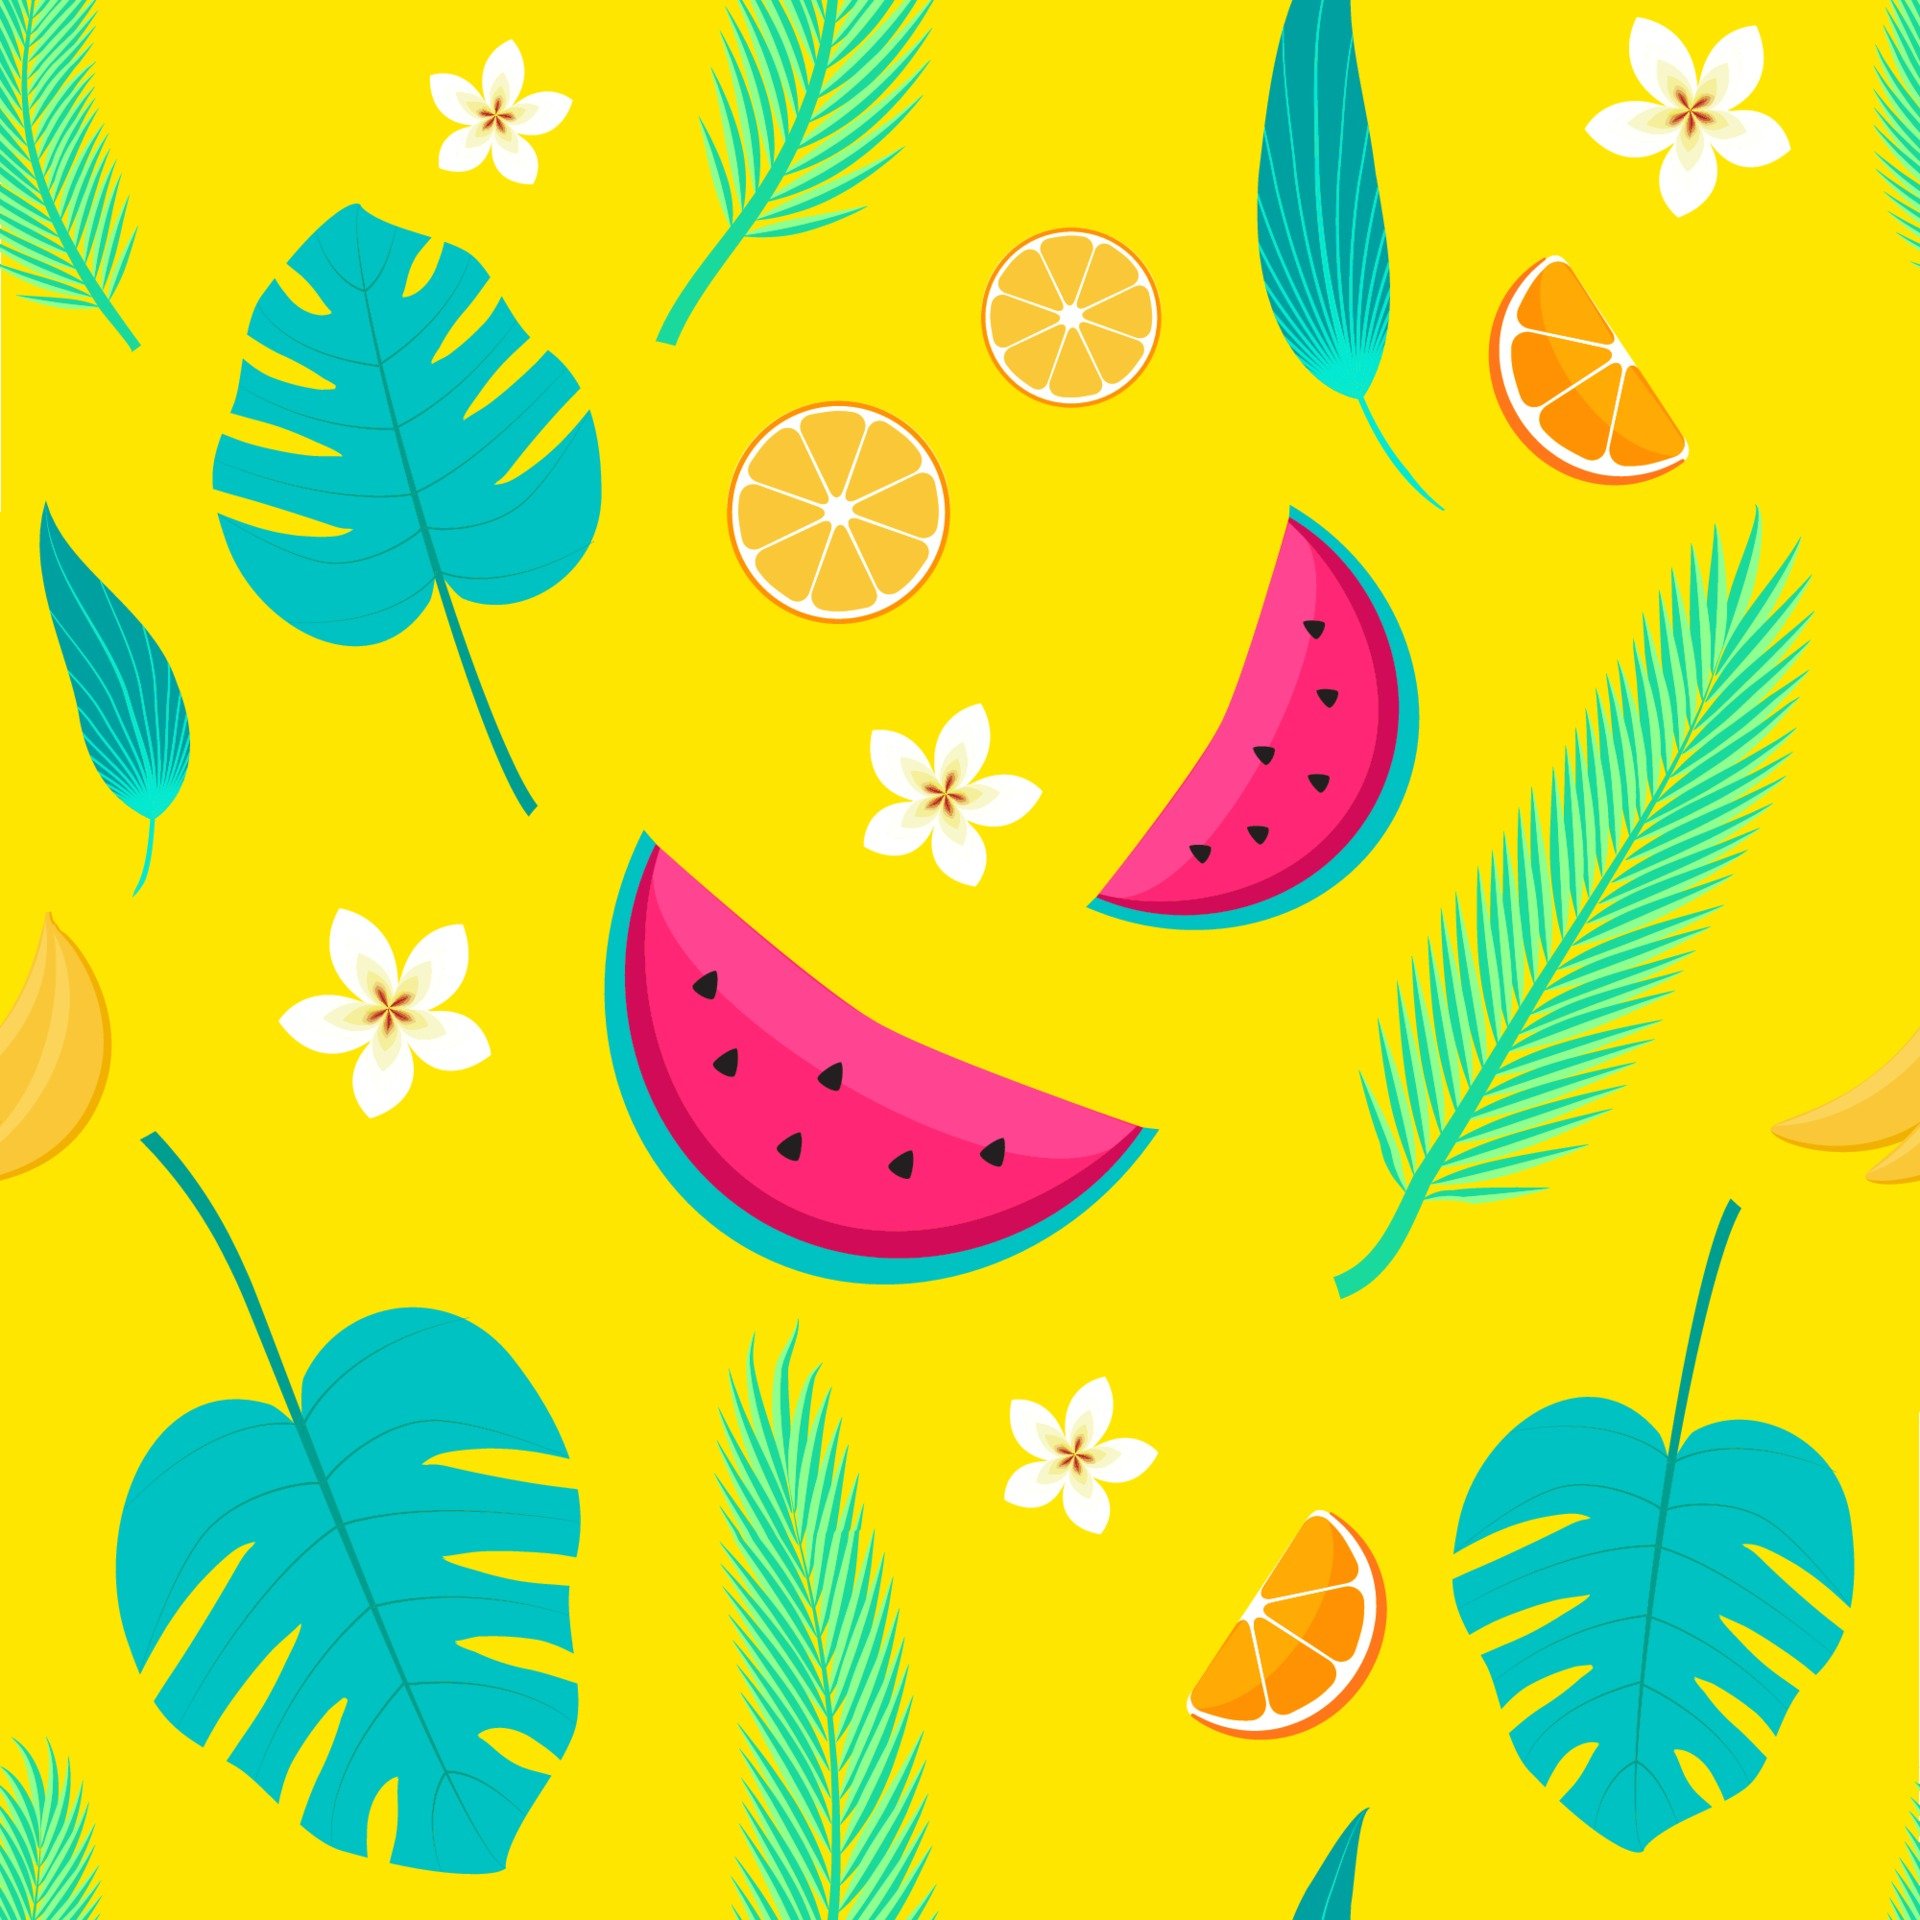 Tropical Fruits and palm Leafes Seamless Pattern, Summer Backgroundin Vector. Illustration of Watermelon, Oranges, Bannanas, Flowers and Leaves. Perfect for wallpaper, web page background, surface textures, textile